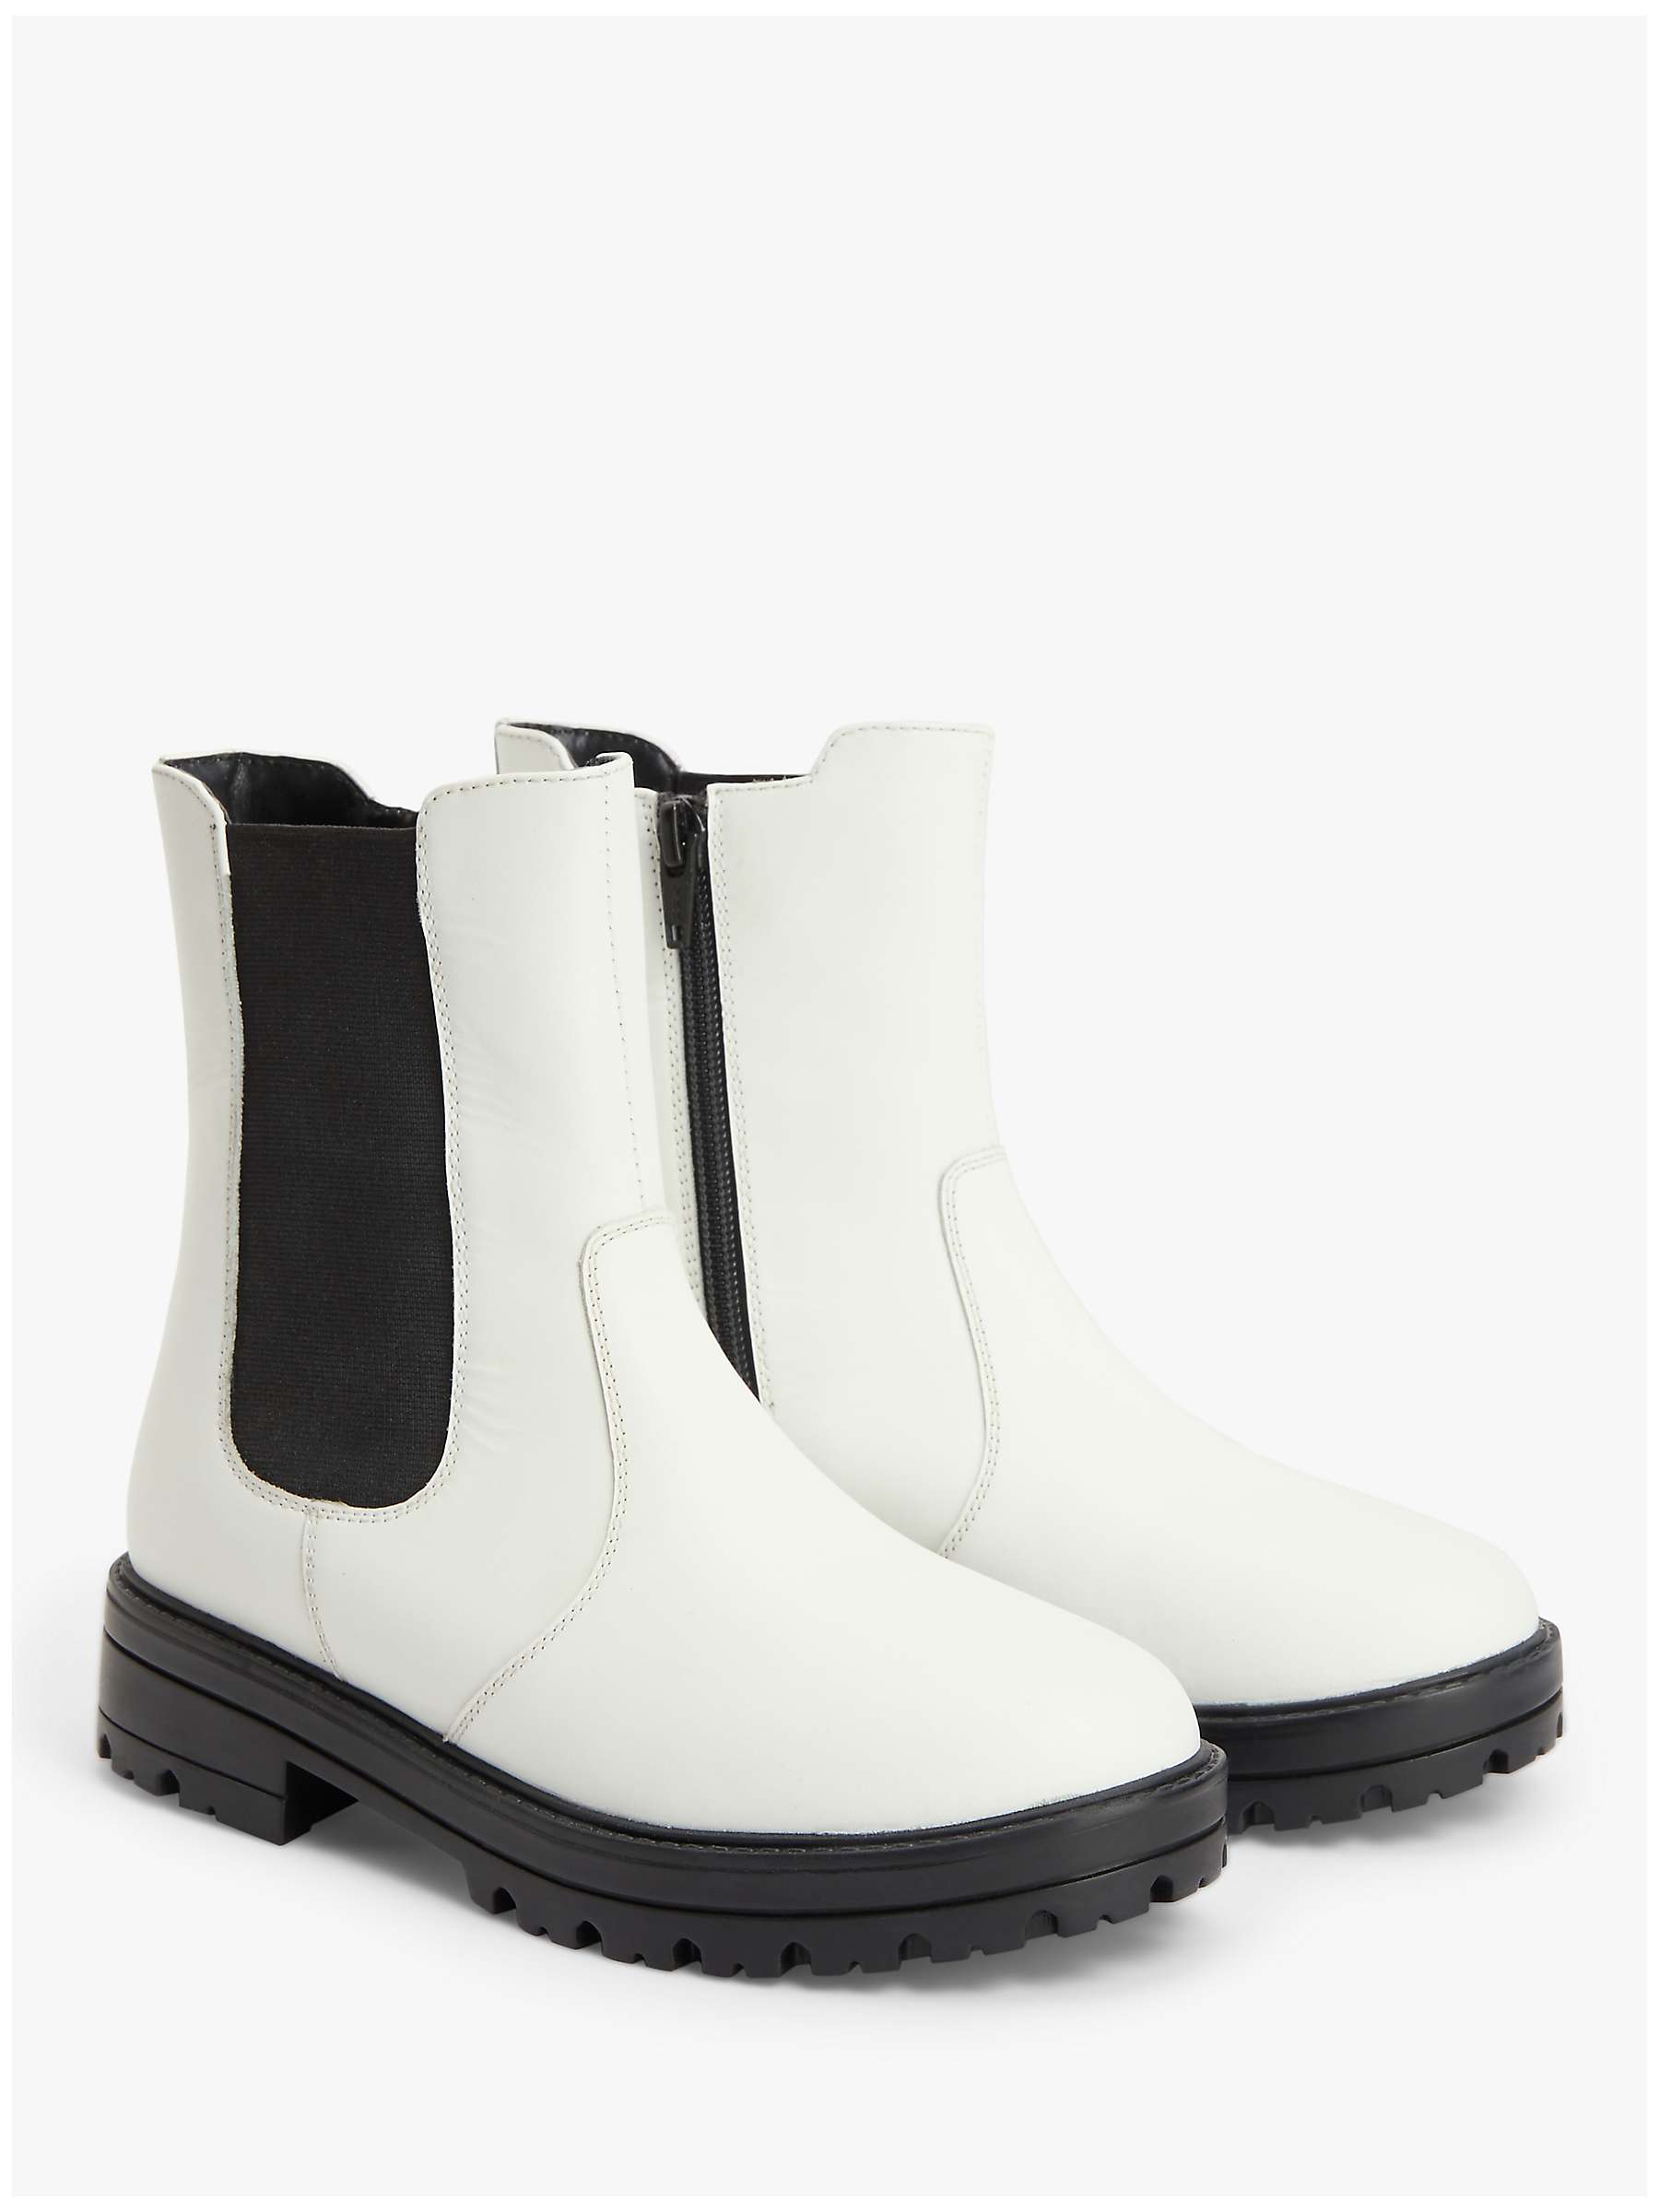 Buy John Lewis Kids' Chunky Chelsea Boots Online at johnlewis.com